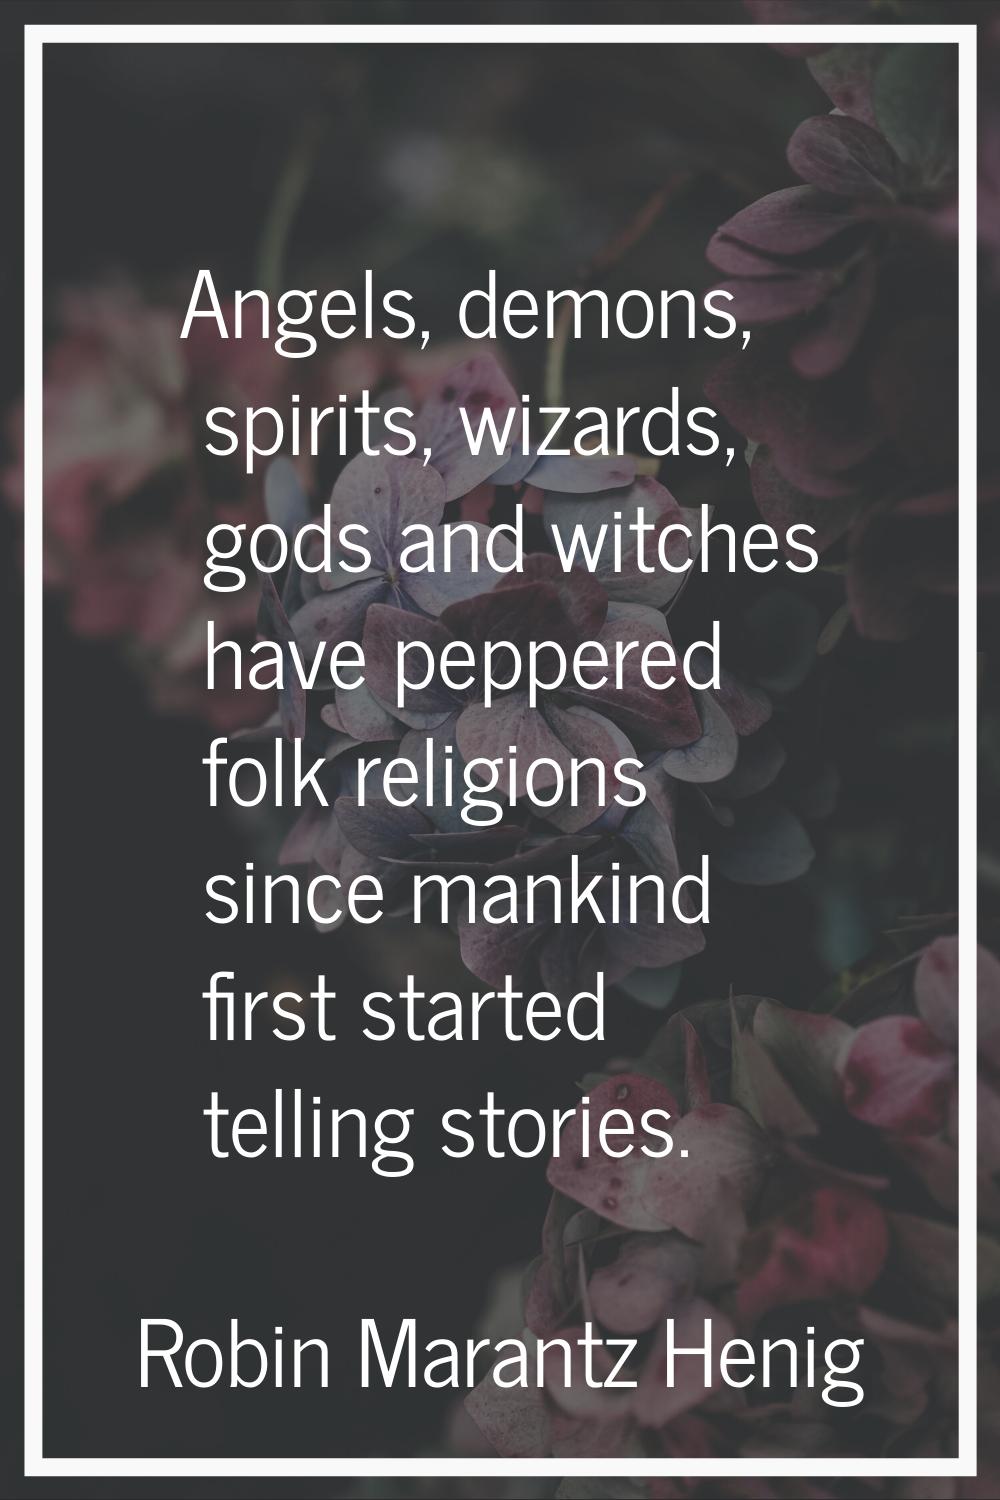 Angels, demons, spirits, wizards, gods and witches have peppered folk religions since mankind first